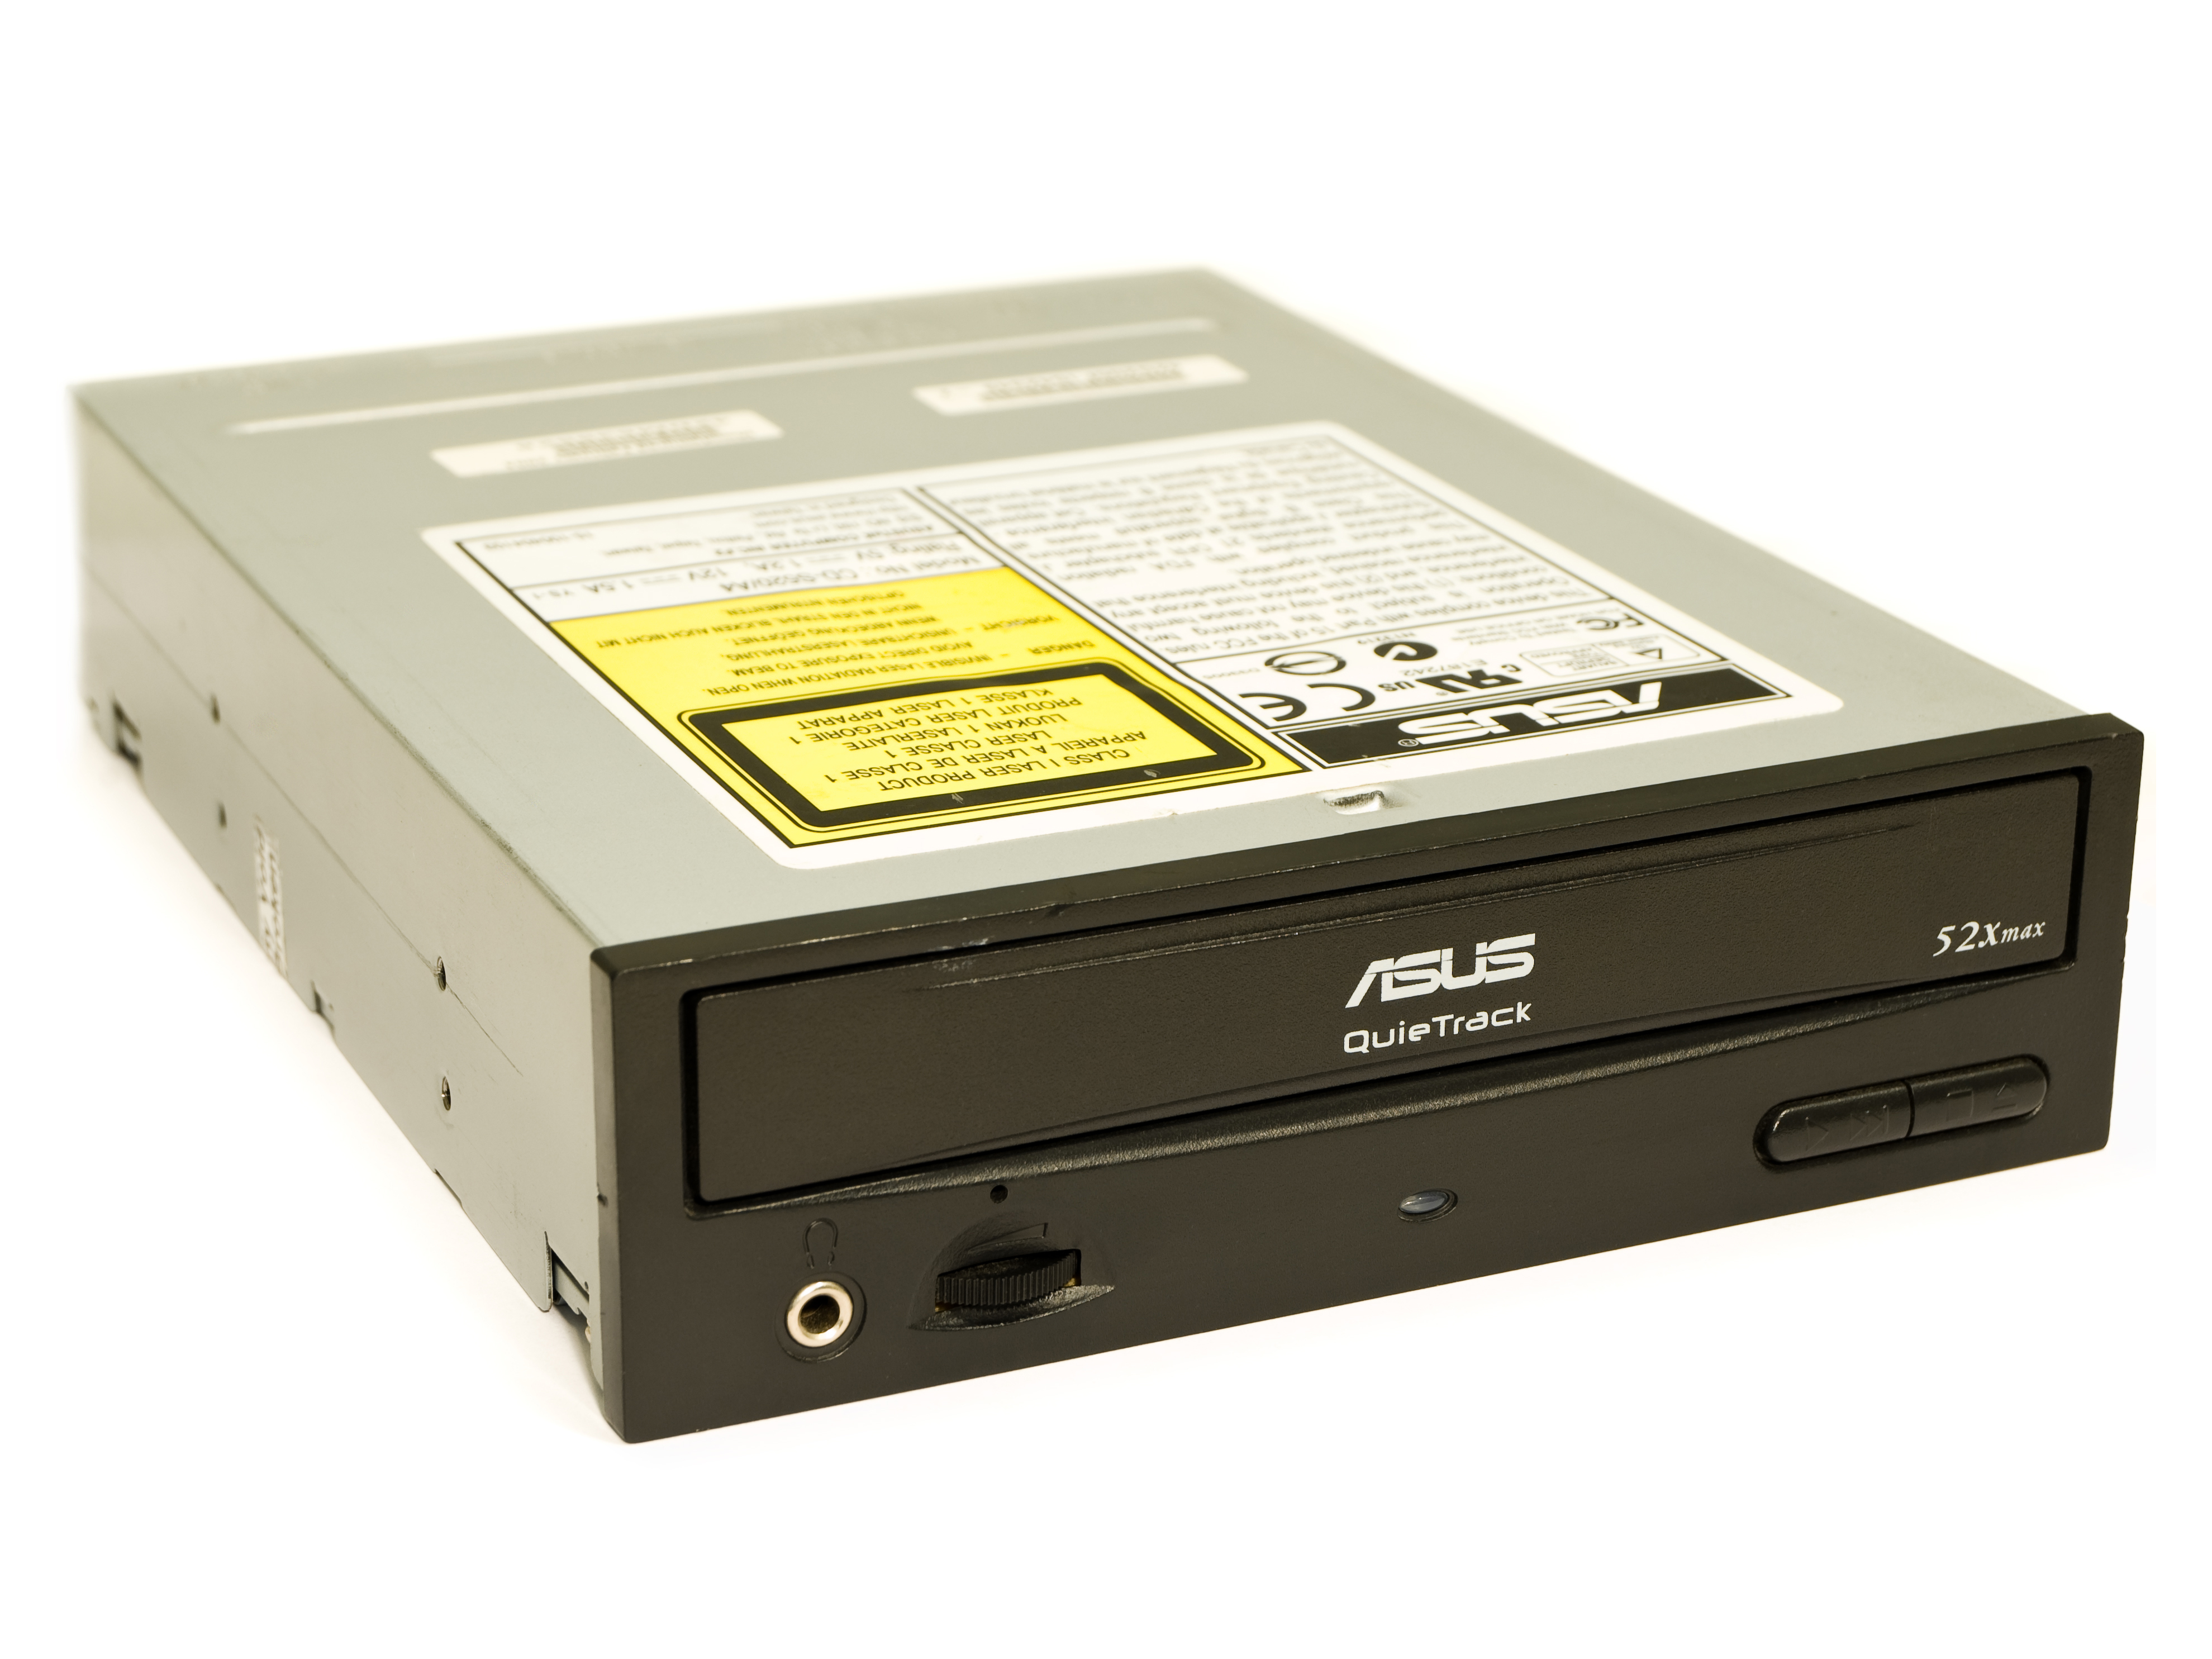 File:ASUS CD-ROM CD-S520-A4 20080821.jpg - Wikimedia Commons